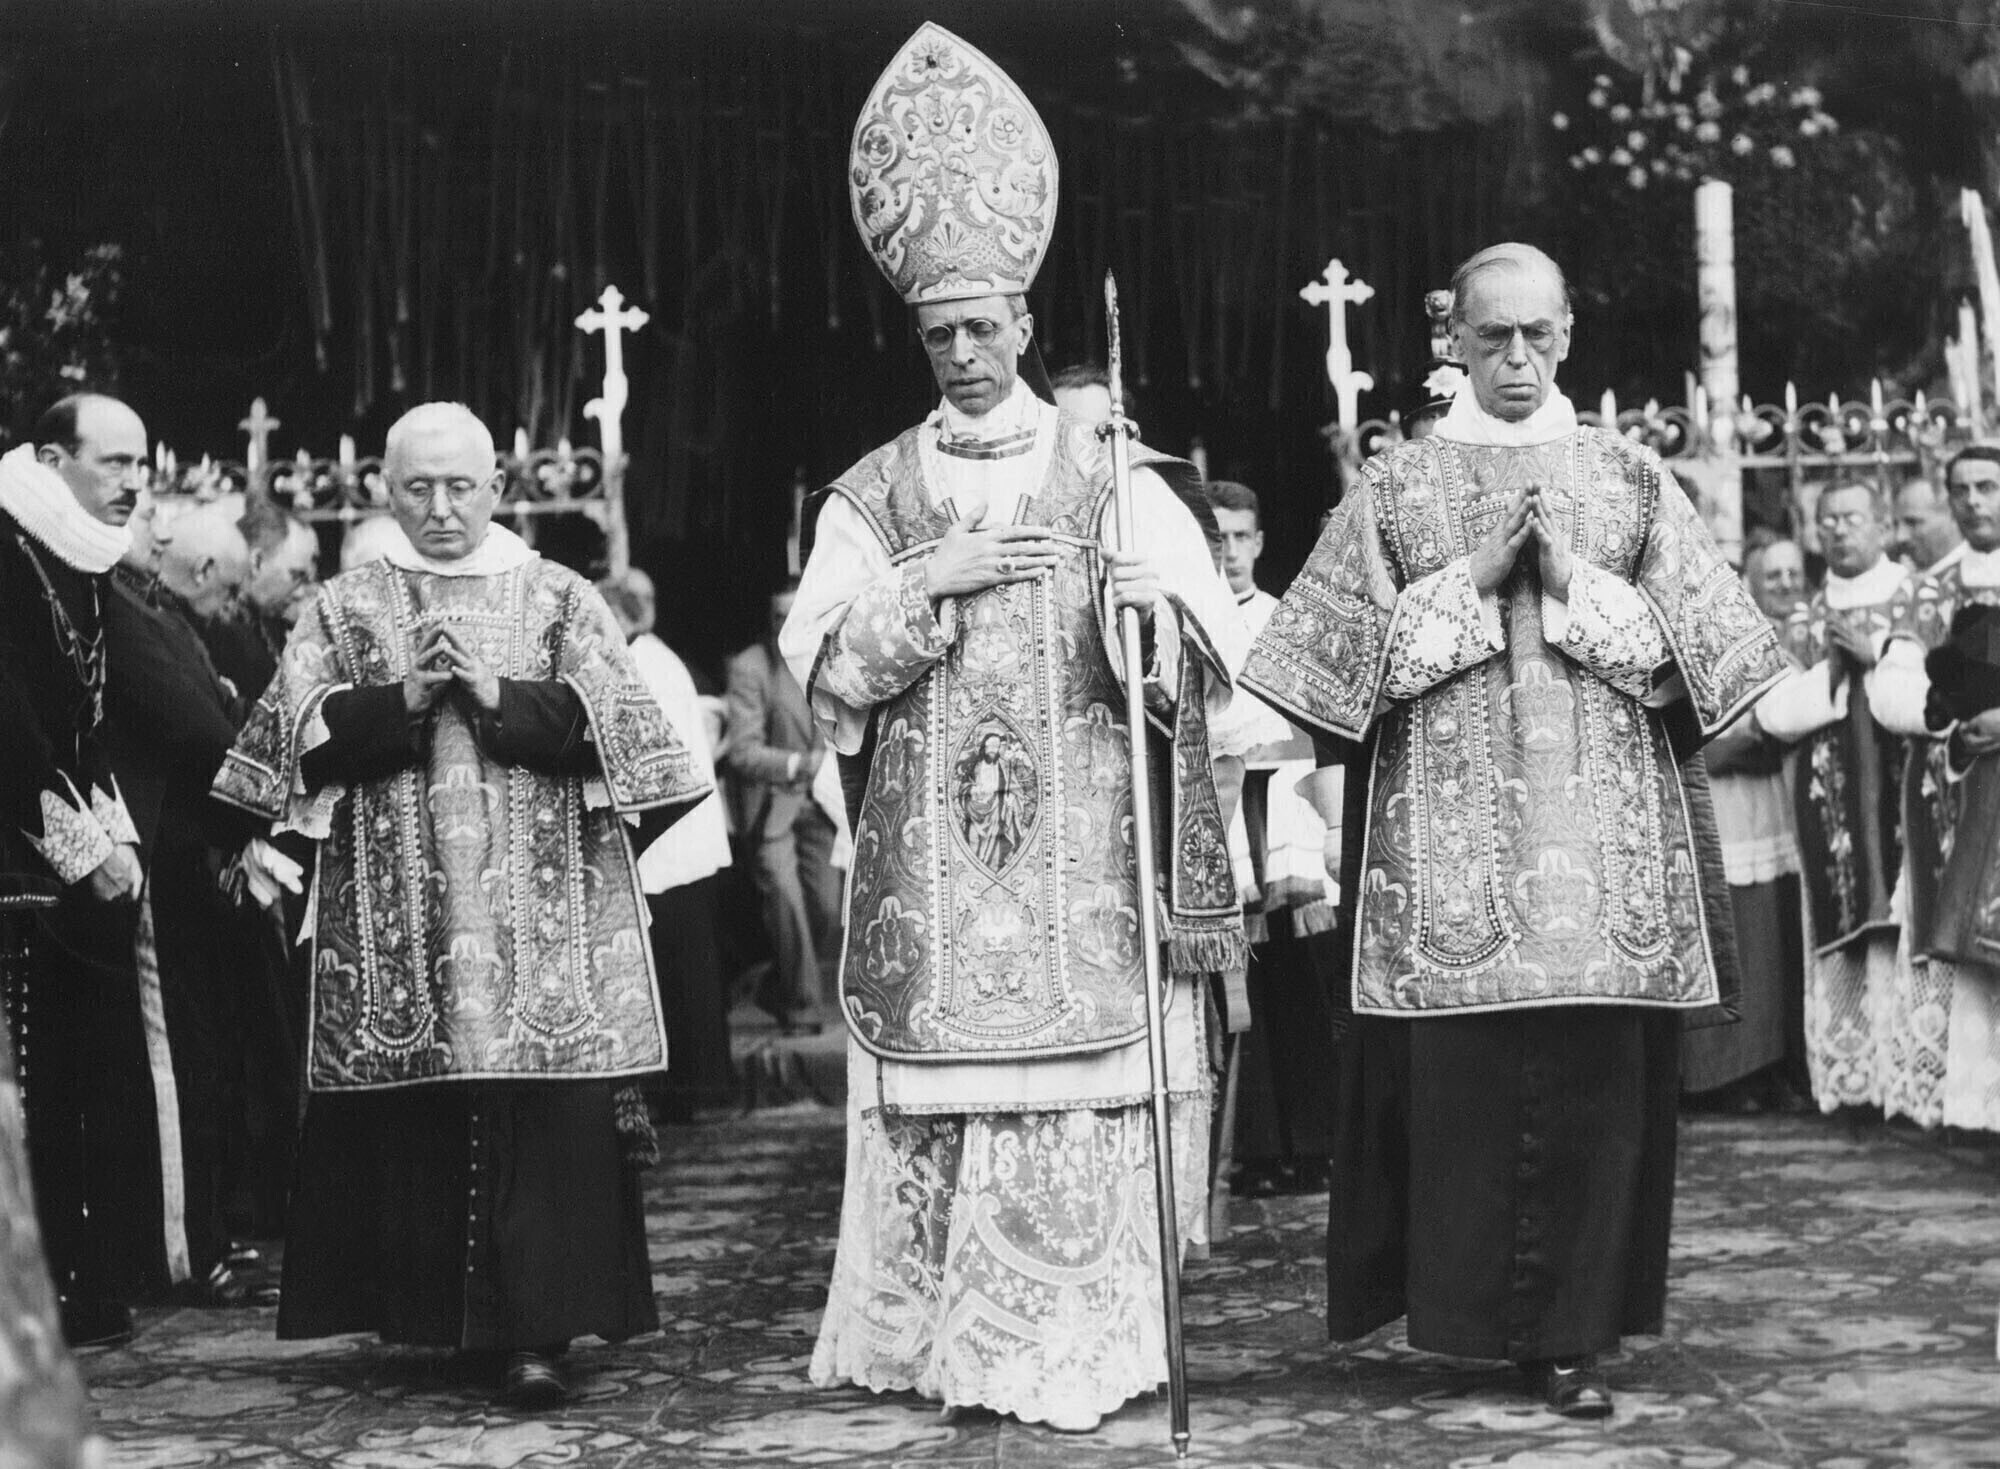 FILE - Undated file photo of Pope Pius XII. The recently-opened archives of Pope Pius XII have shed new light on claims the World War II-era pope didn't speak out about the Holocaust. But they're also providing details about another contentious chapter in Vatican history: the scandal over the founder of the Legionaries of Christ. (AP Photo, File)